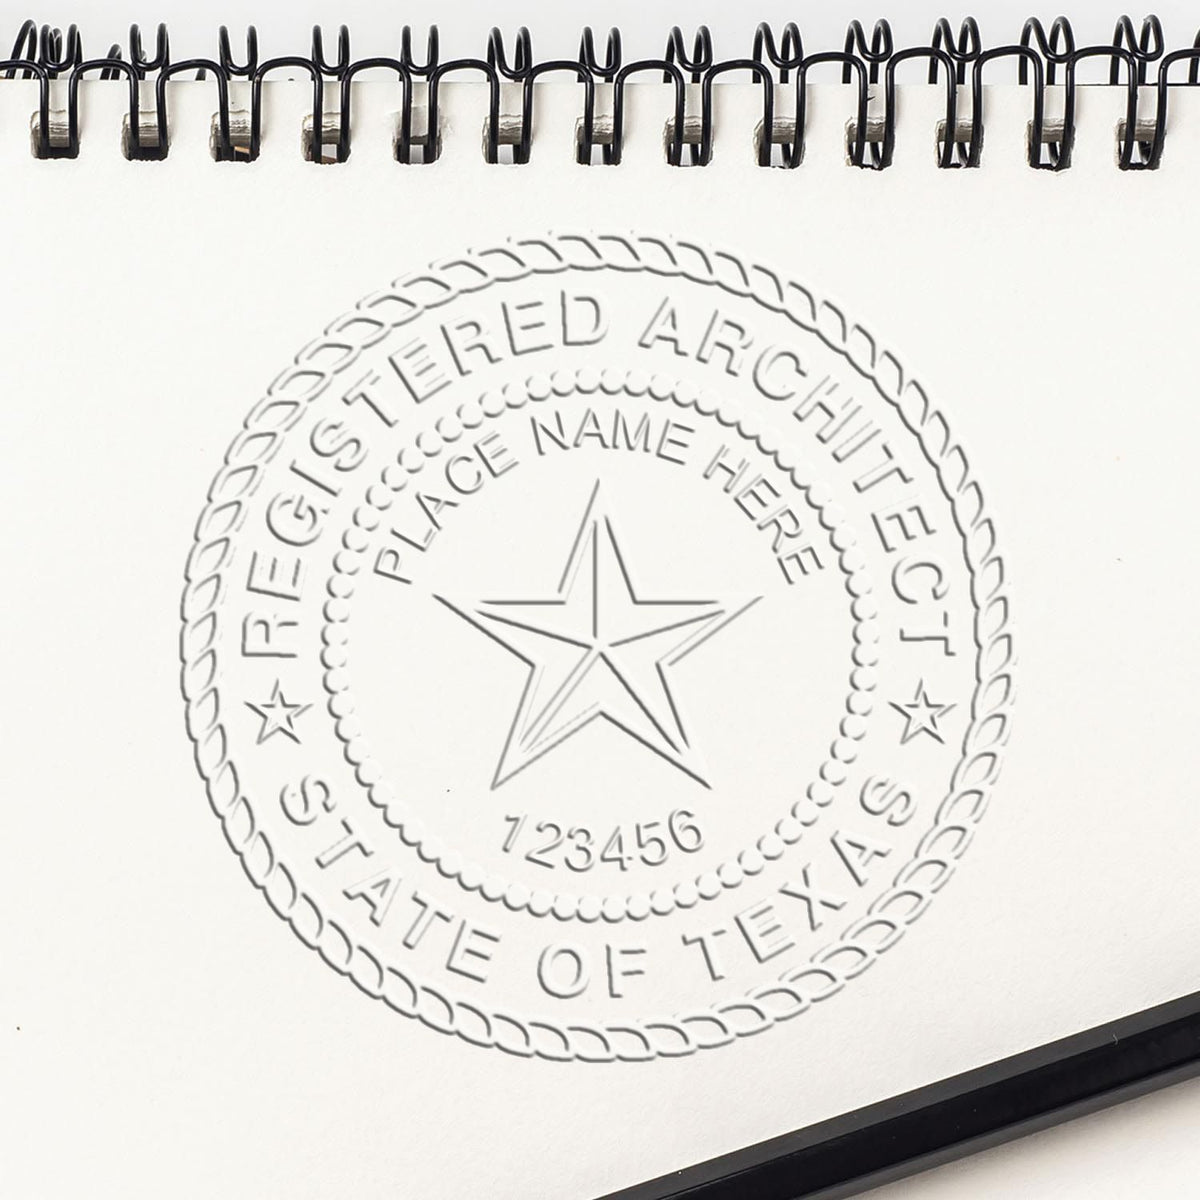 The State of Texas Architectural Seal Embosser stamp impression comes to life with a crisp, detailed photo on paper - showcasing true professional quality.